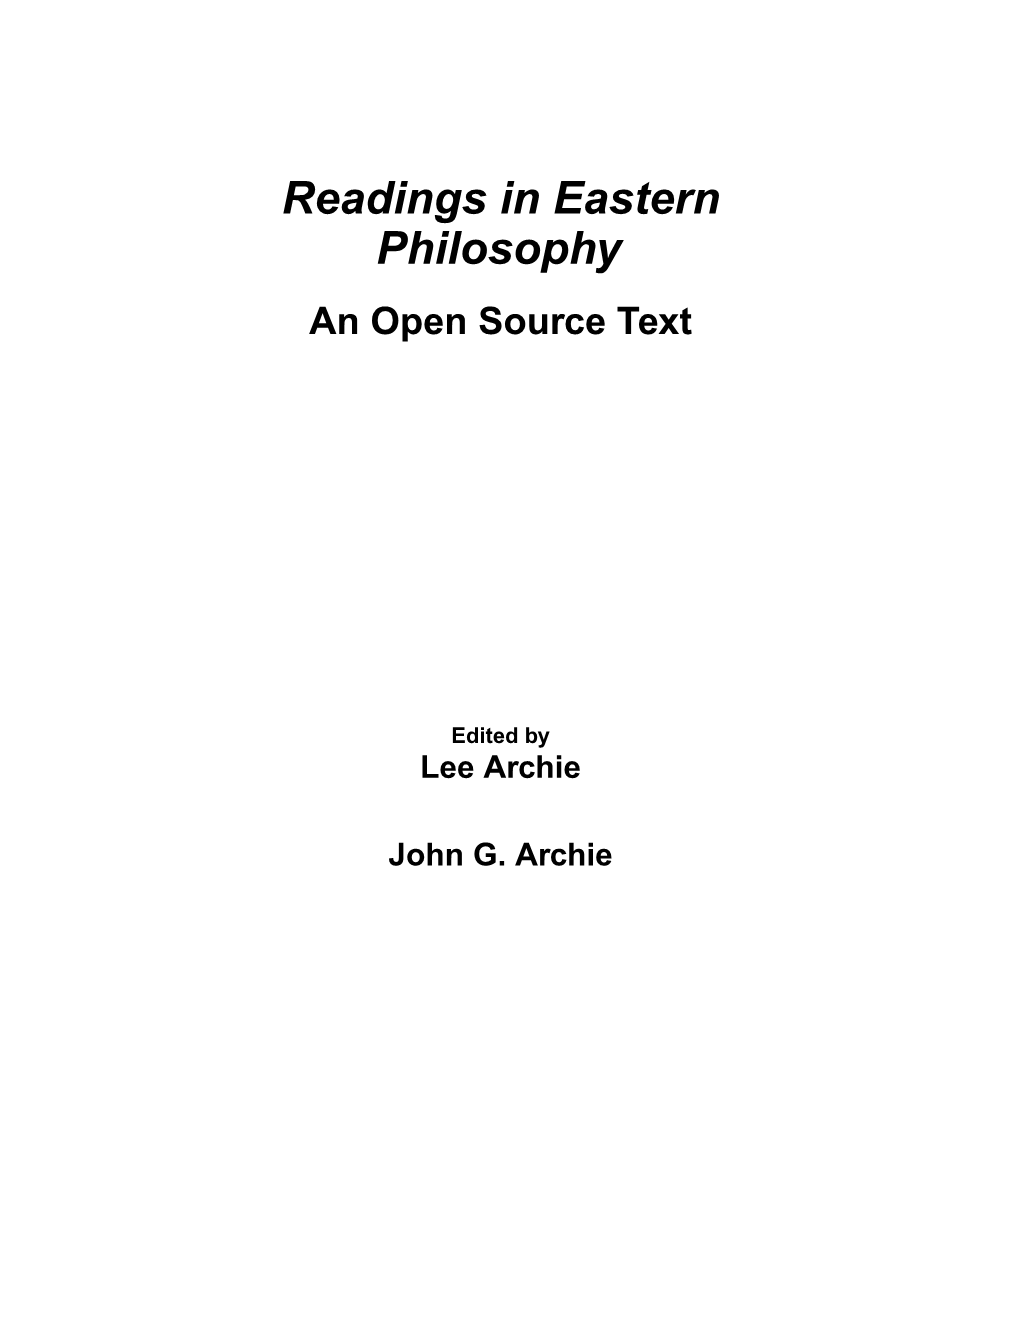 Readings in Eastern Philosophy: an Open Source Text Edited by Lee Archie and John G